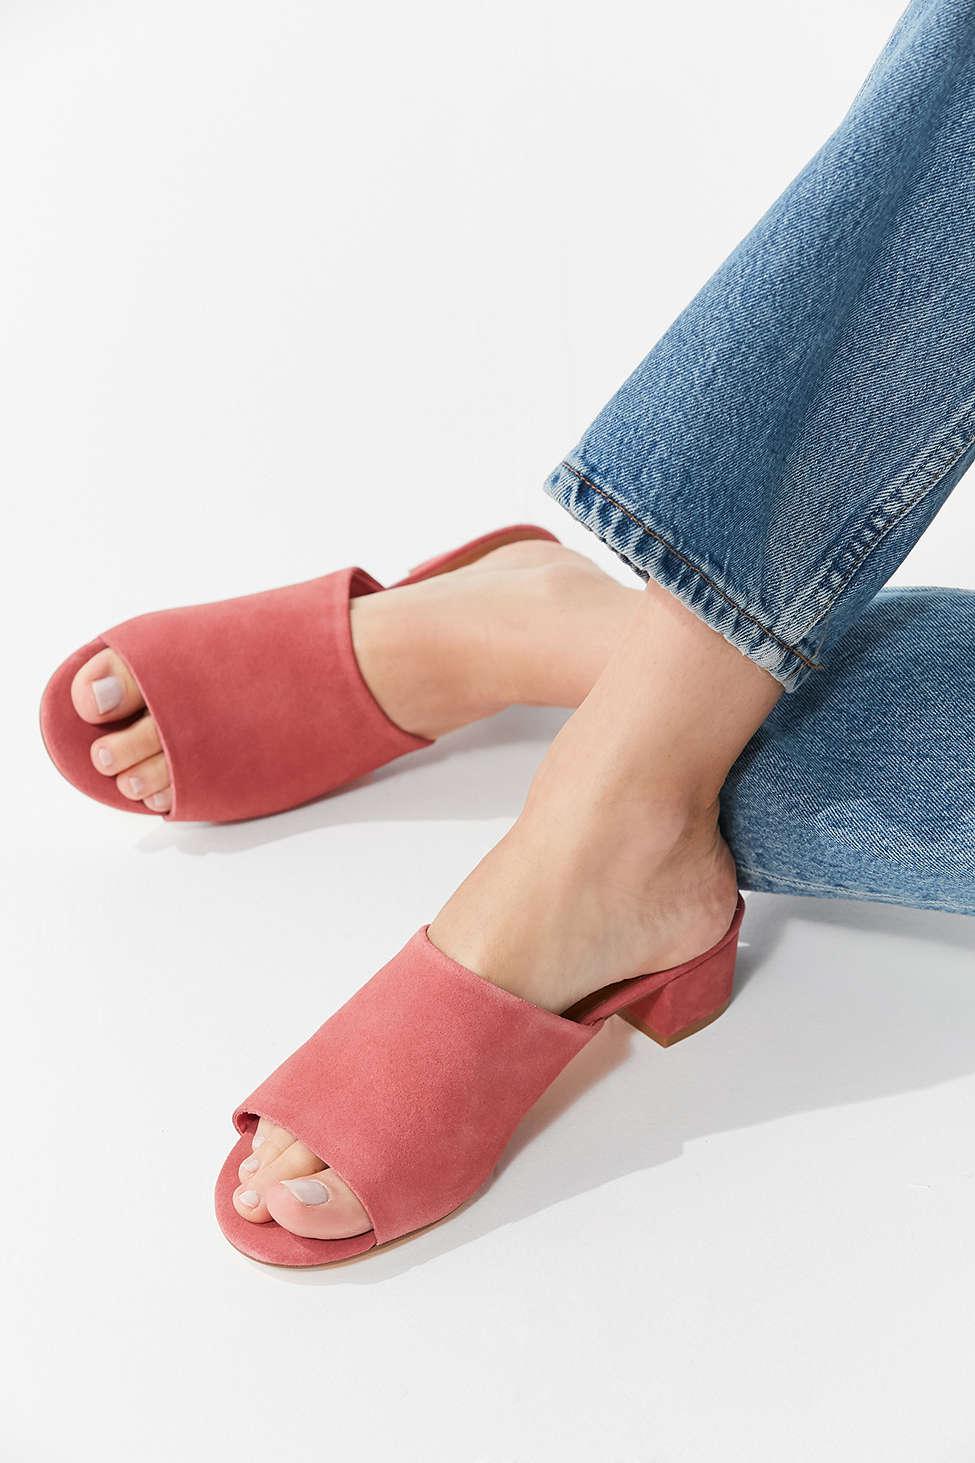 Urban Outfitters Patti Suede Mule Heel in Pink - Lyst